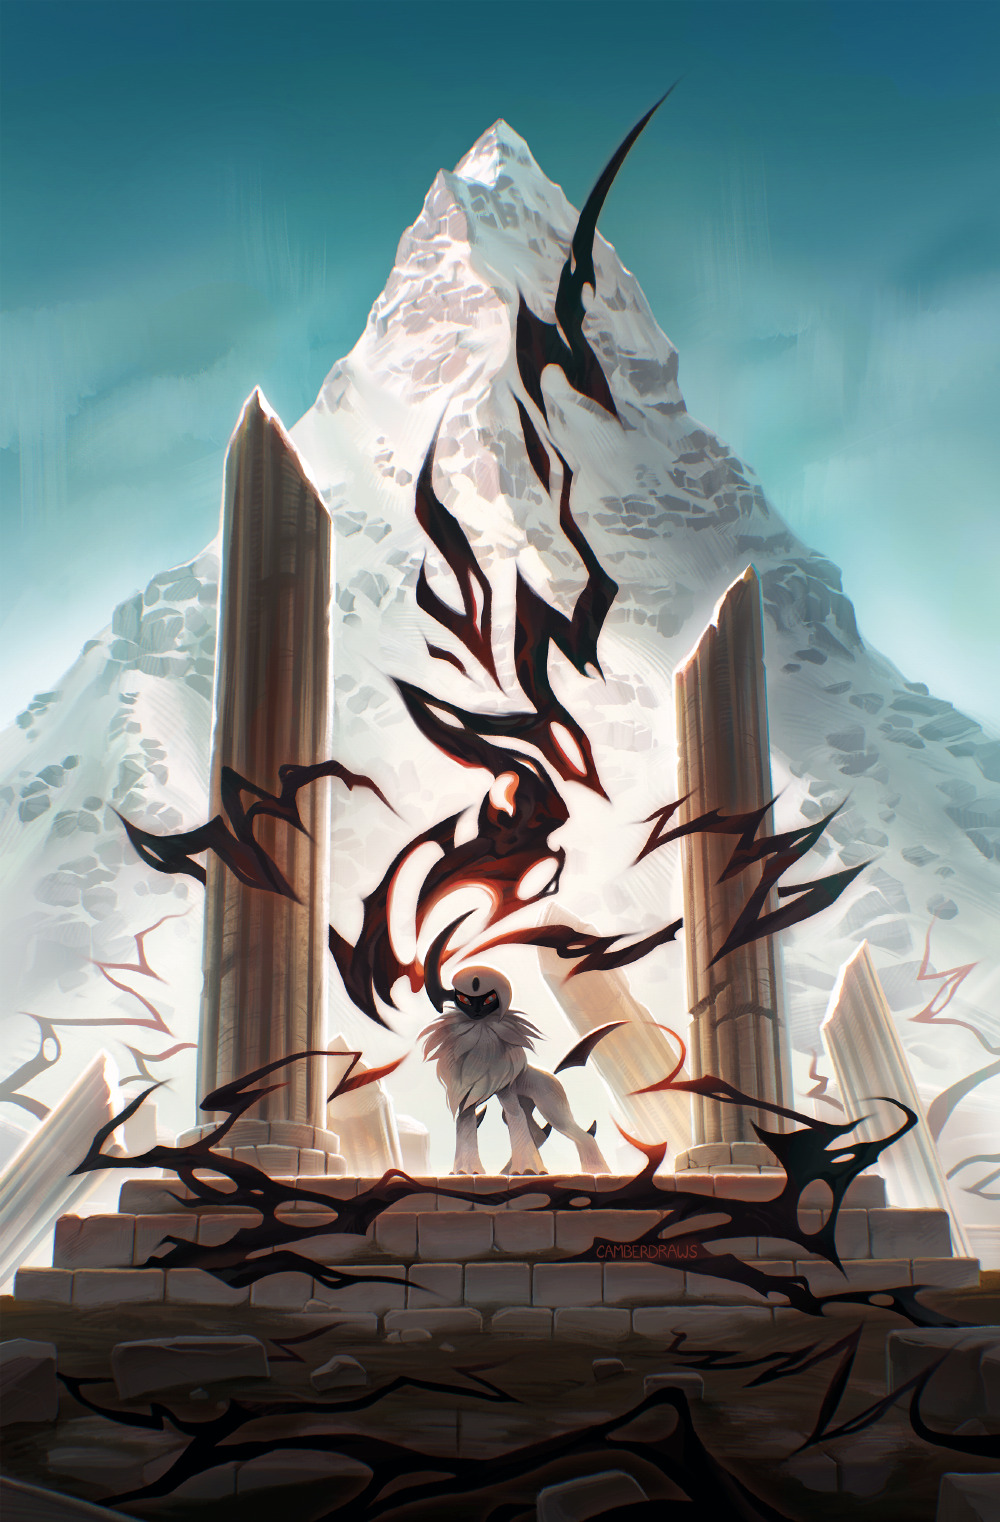 “Curious happenings have been spotted atop Mt. Coronet…”
This painting was done for Eclipse: A Dark Type Pokemon Zine! I was very happy to be given the opportunity to illustrate one of my favorite Pokemon 🖤